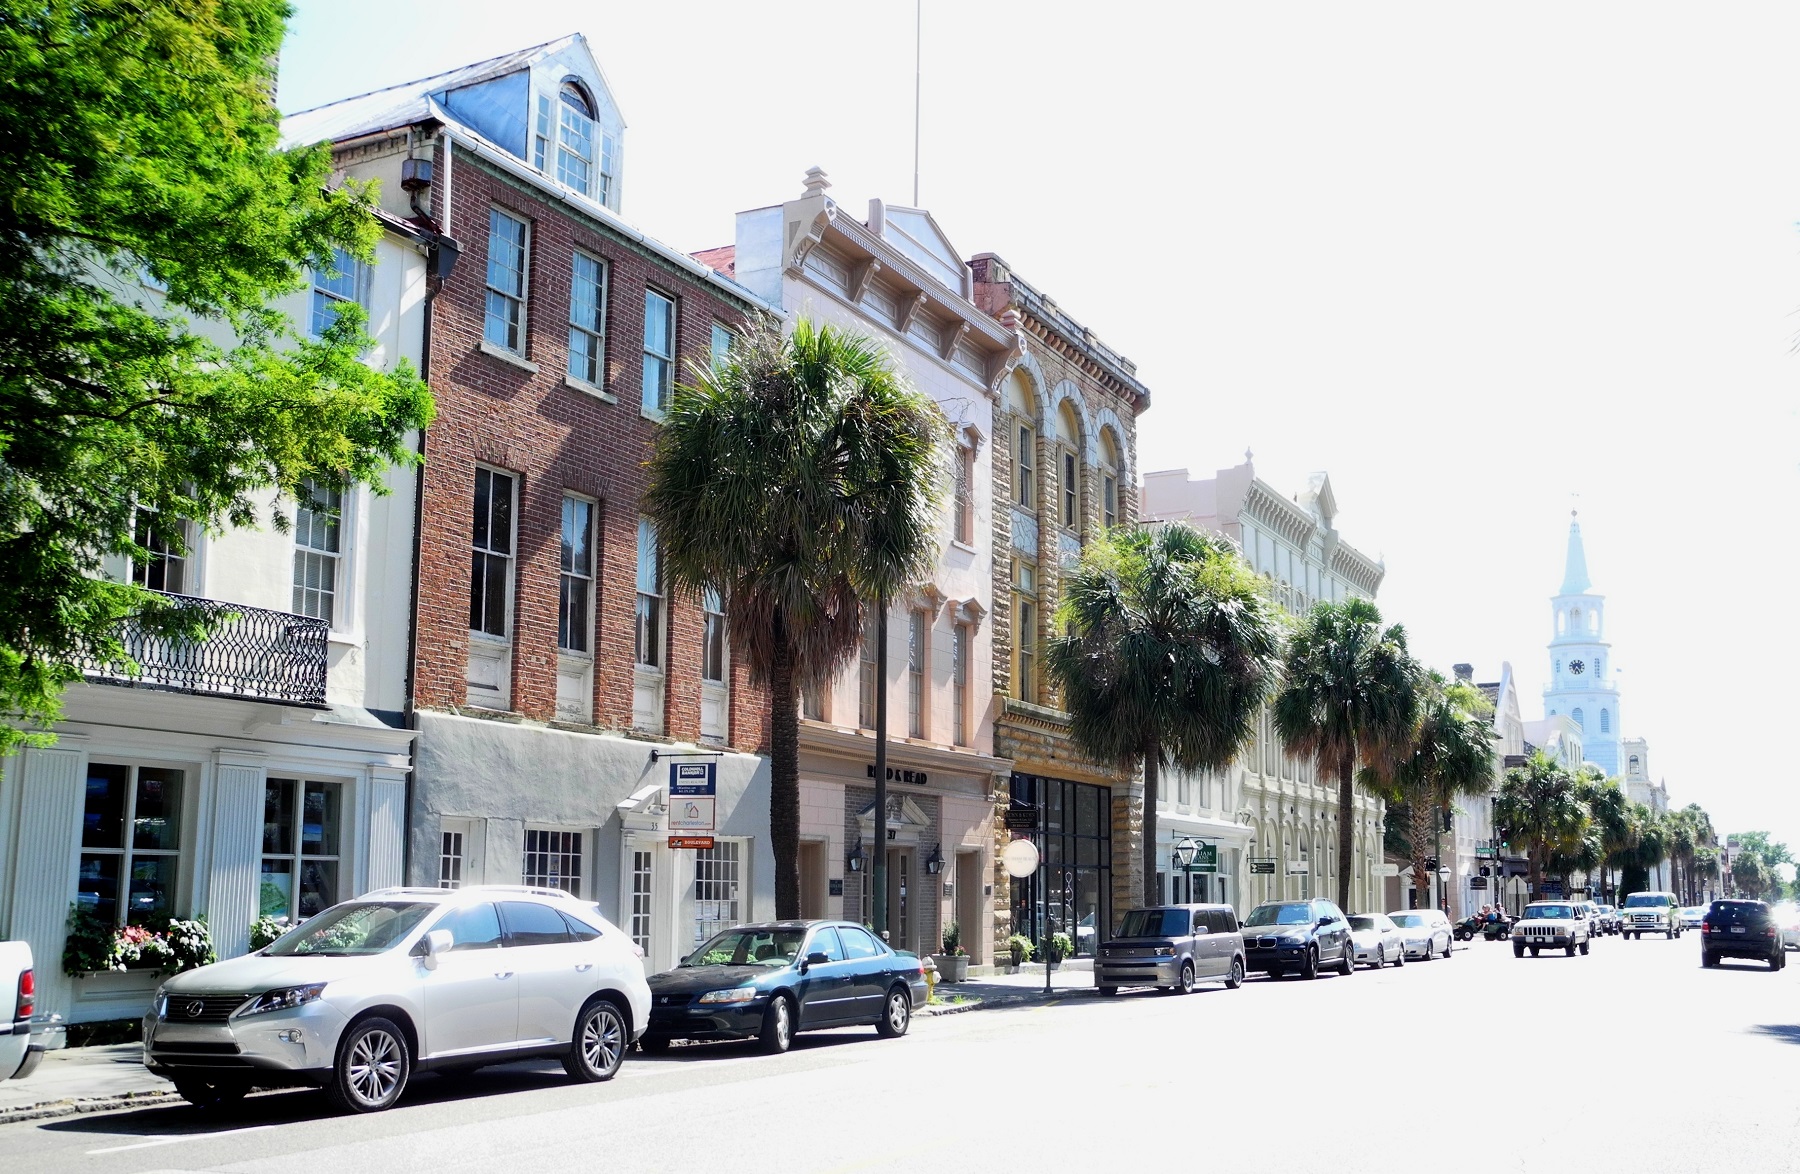 street view of buildings on a street in charleston sc